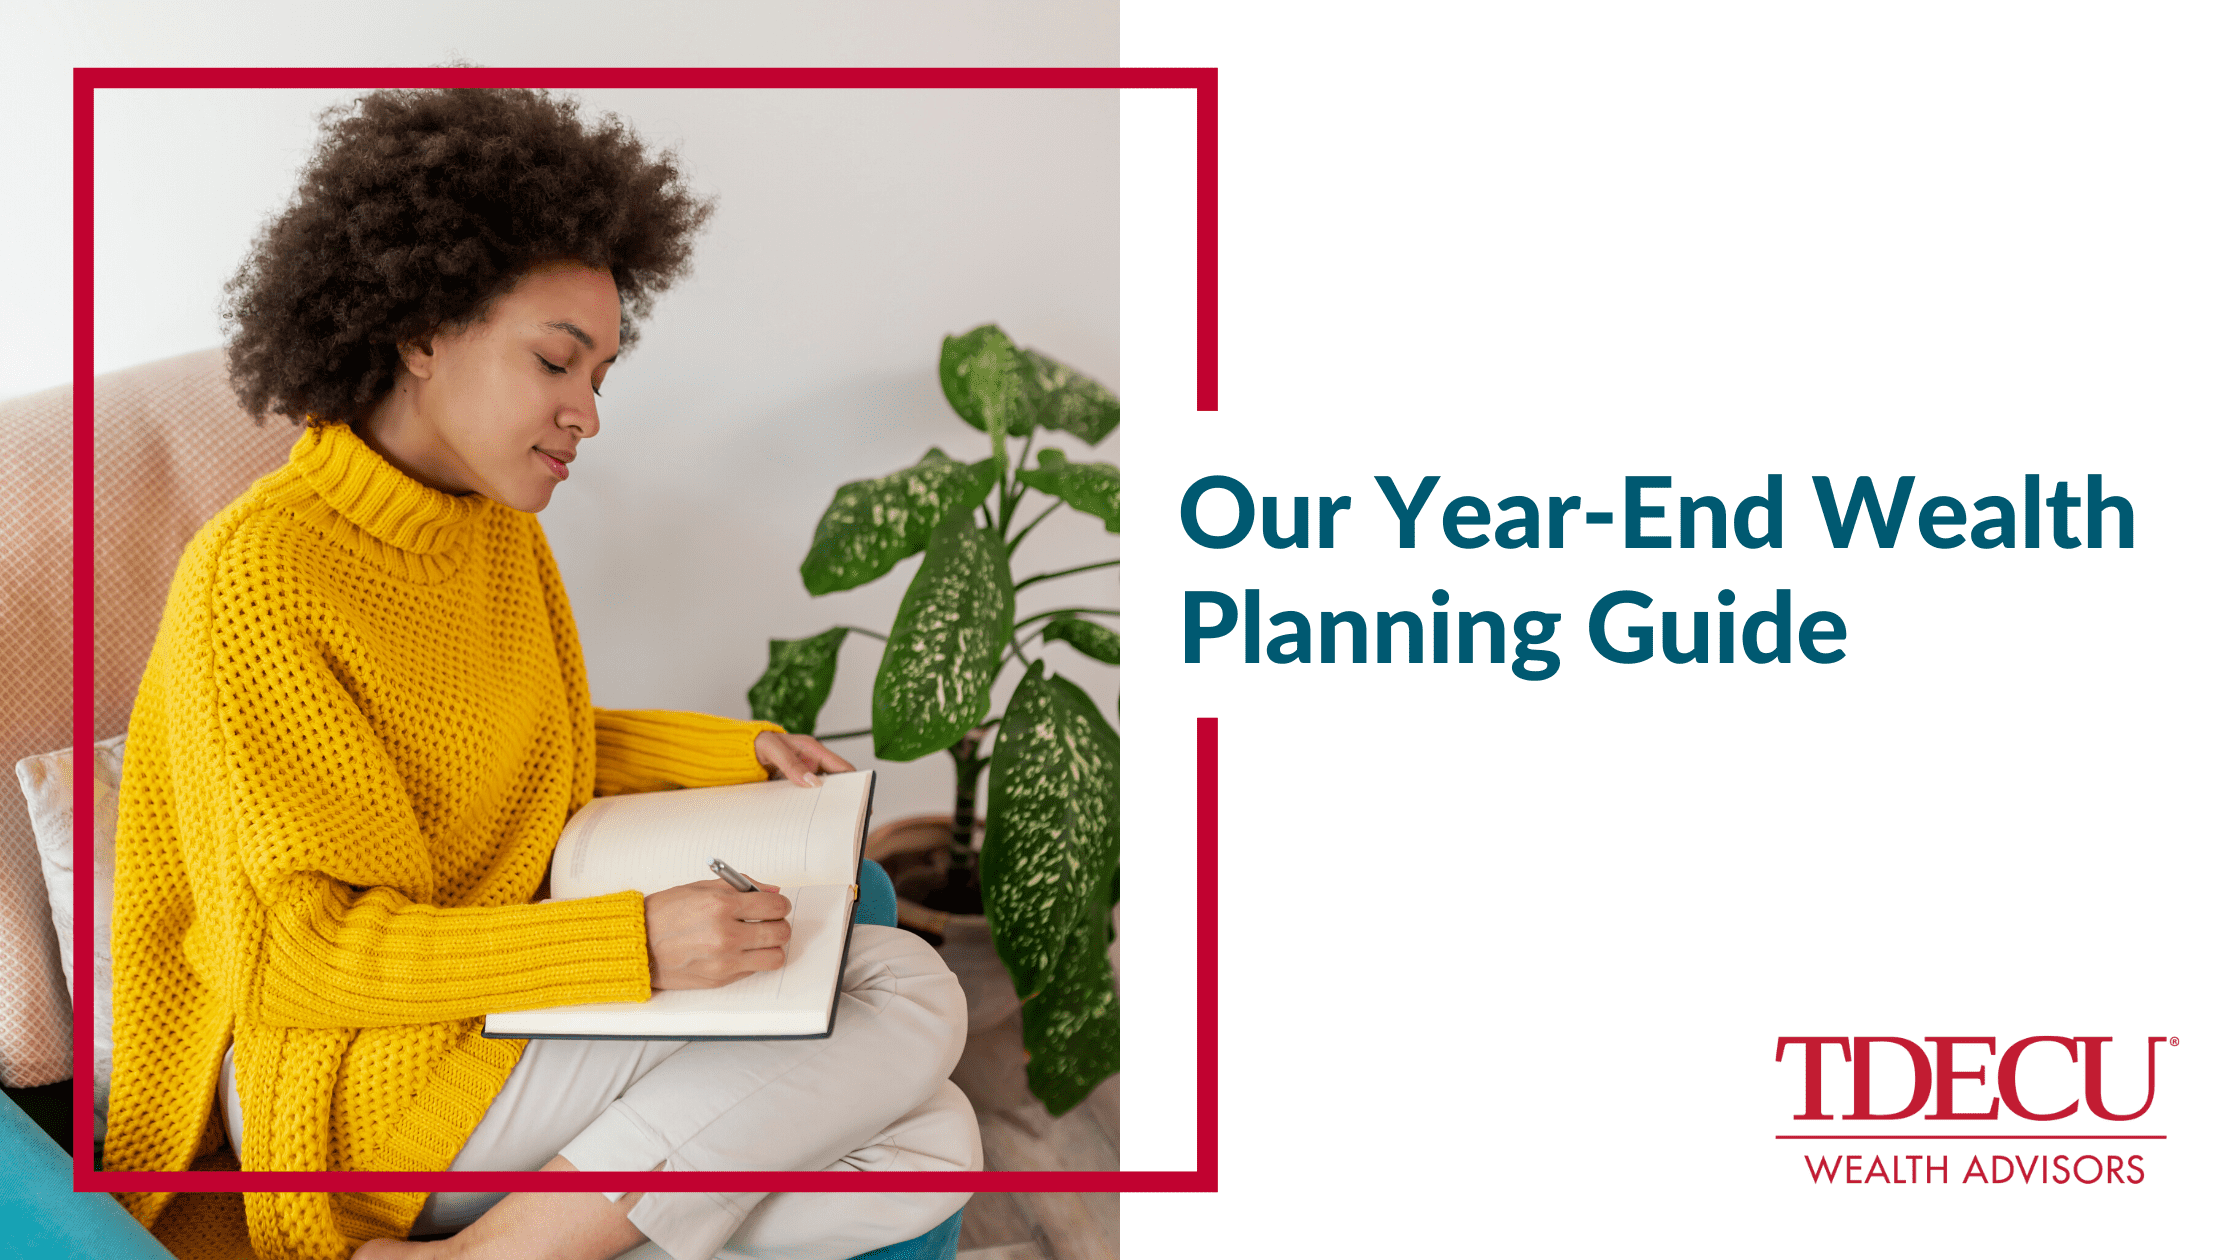 A Year-End Wealth Planning Guide